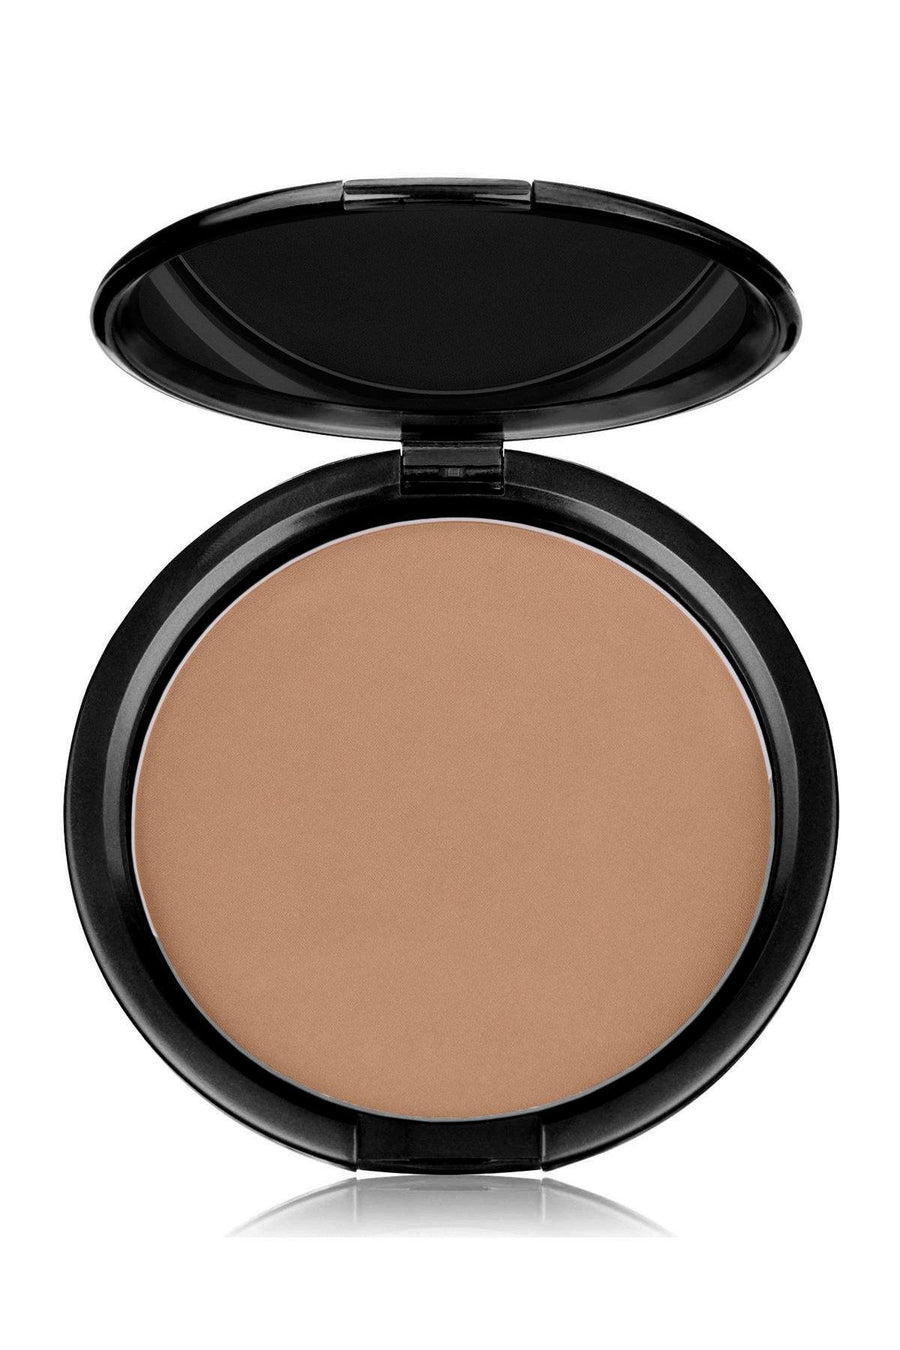 Foundation Brown Tone Light Mineral Pressed Powder & Brush - Blend Mineral Cosmetics